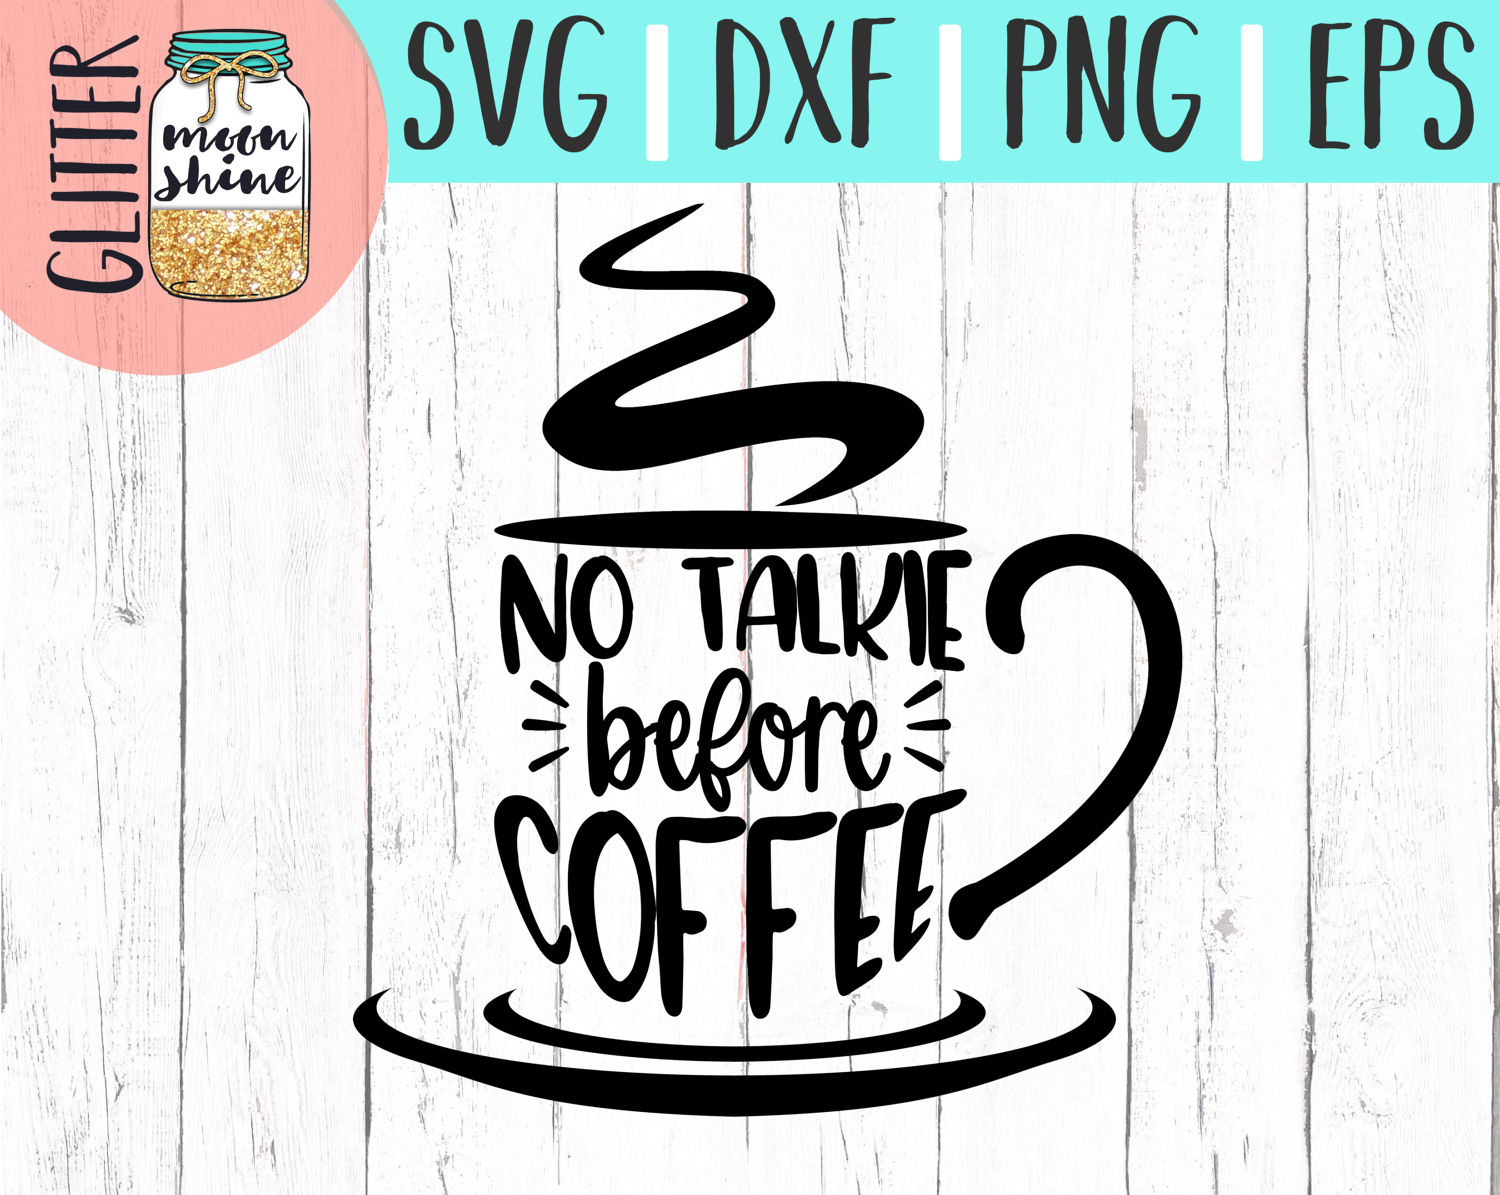 No Talkie Before Coffee svg eps dxf png Files for Cutting